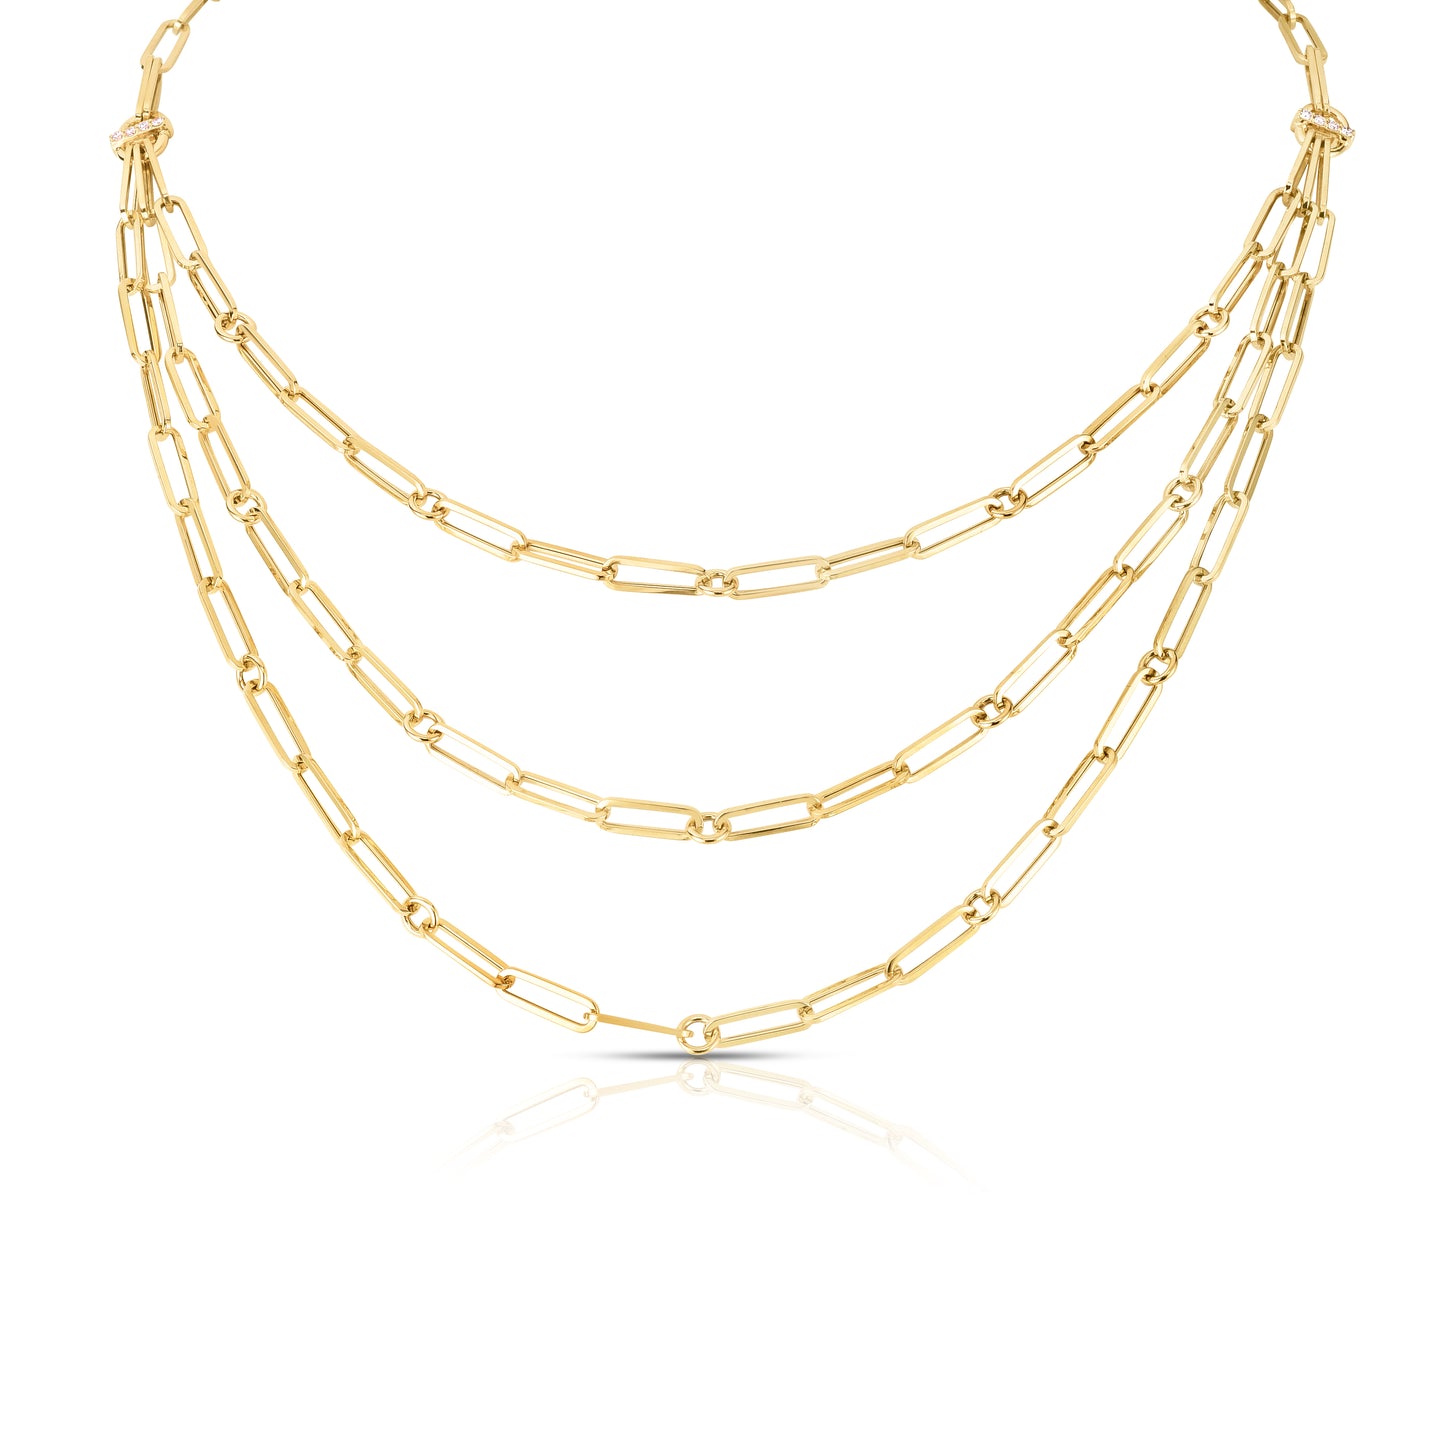 Roberto Coin 18K Yellow Gold Triple Strand Paperclip Chain Necklace with Diamonds